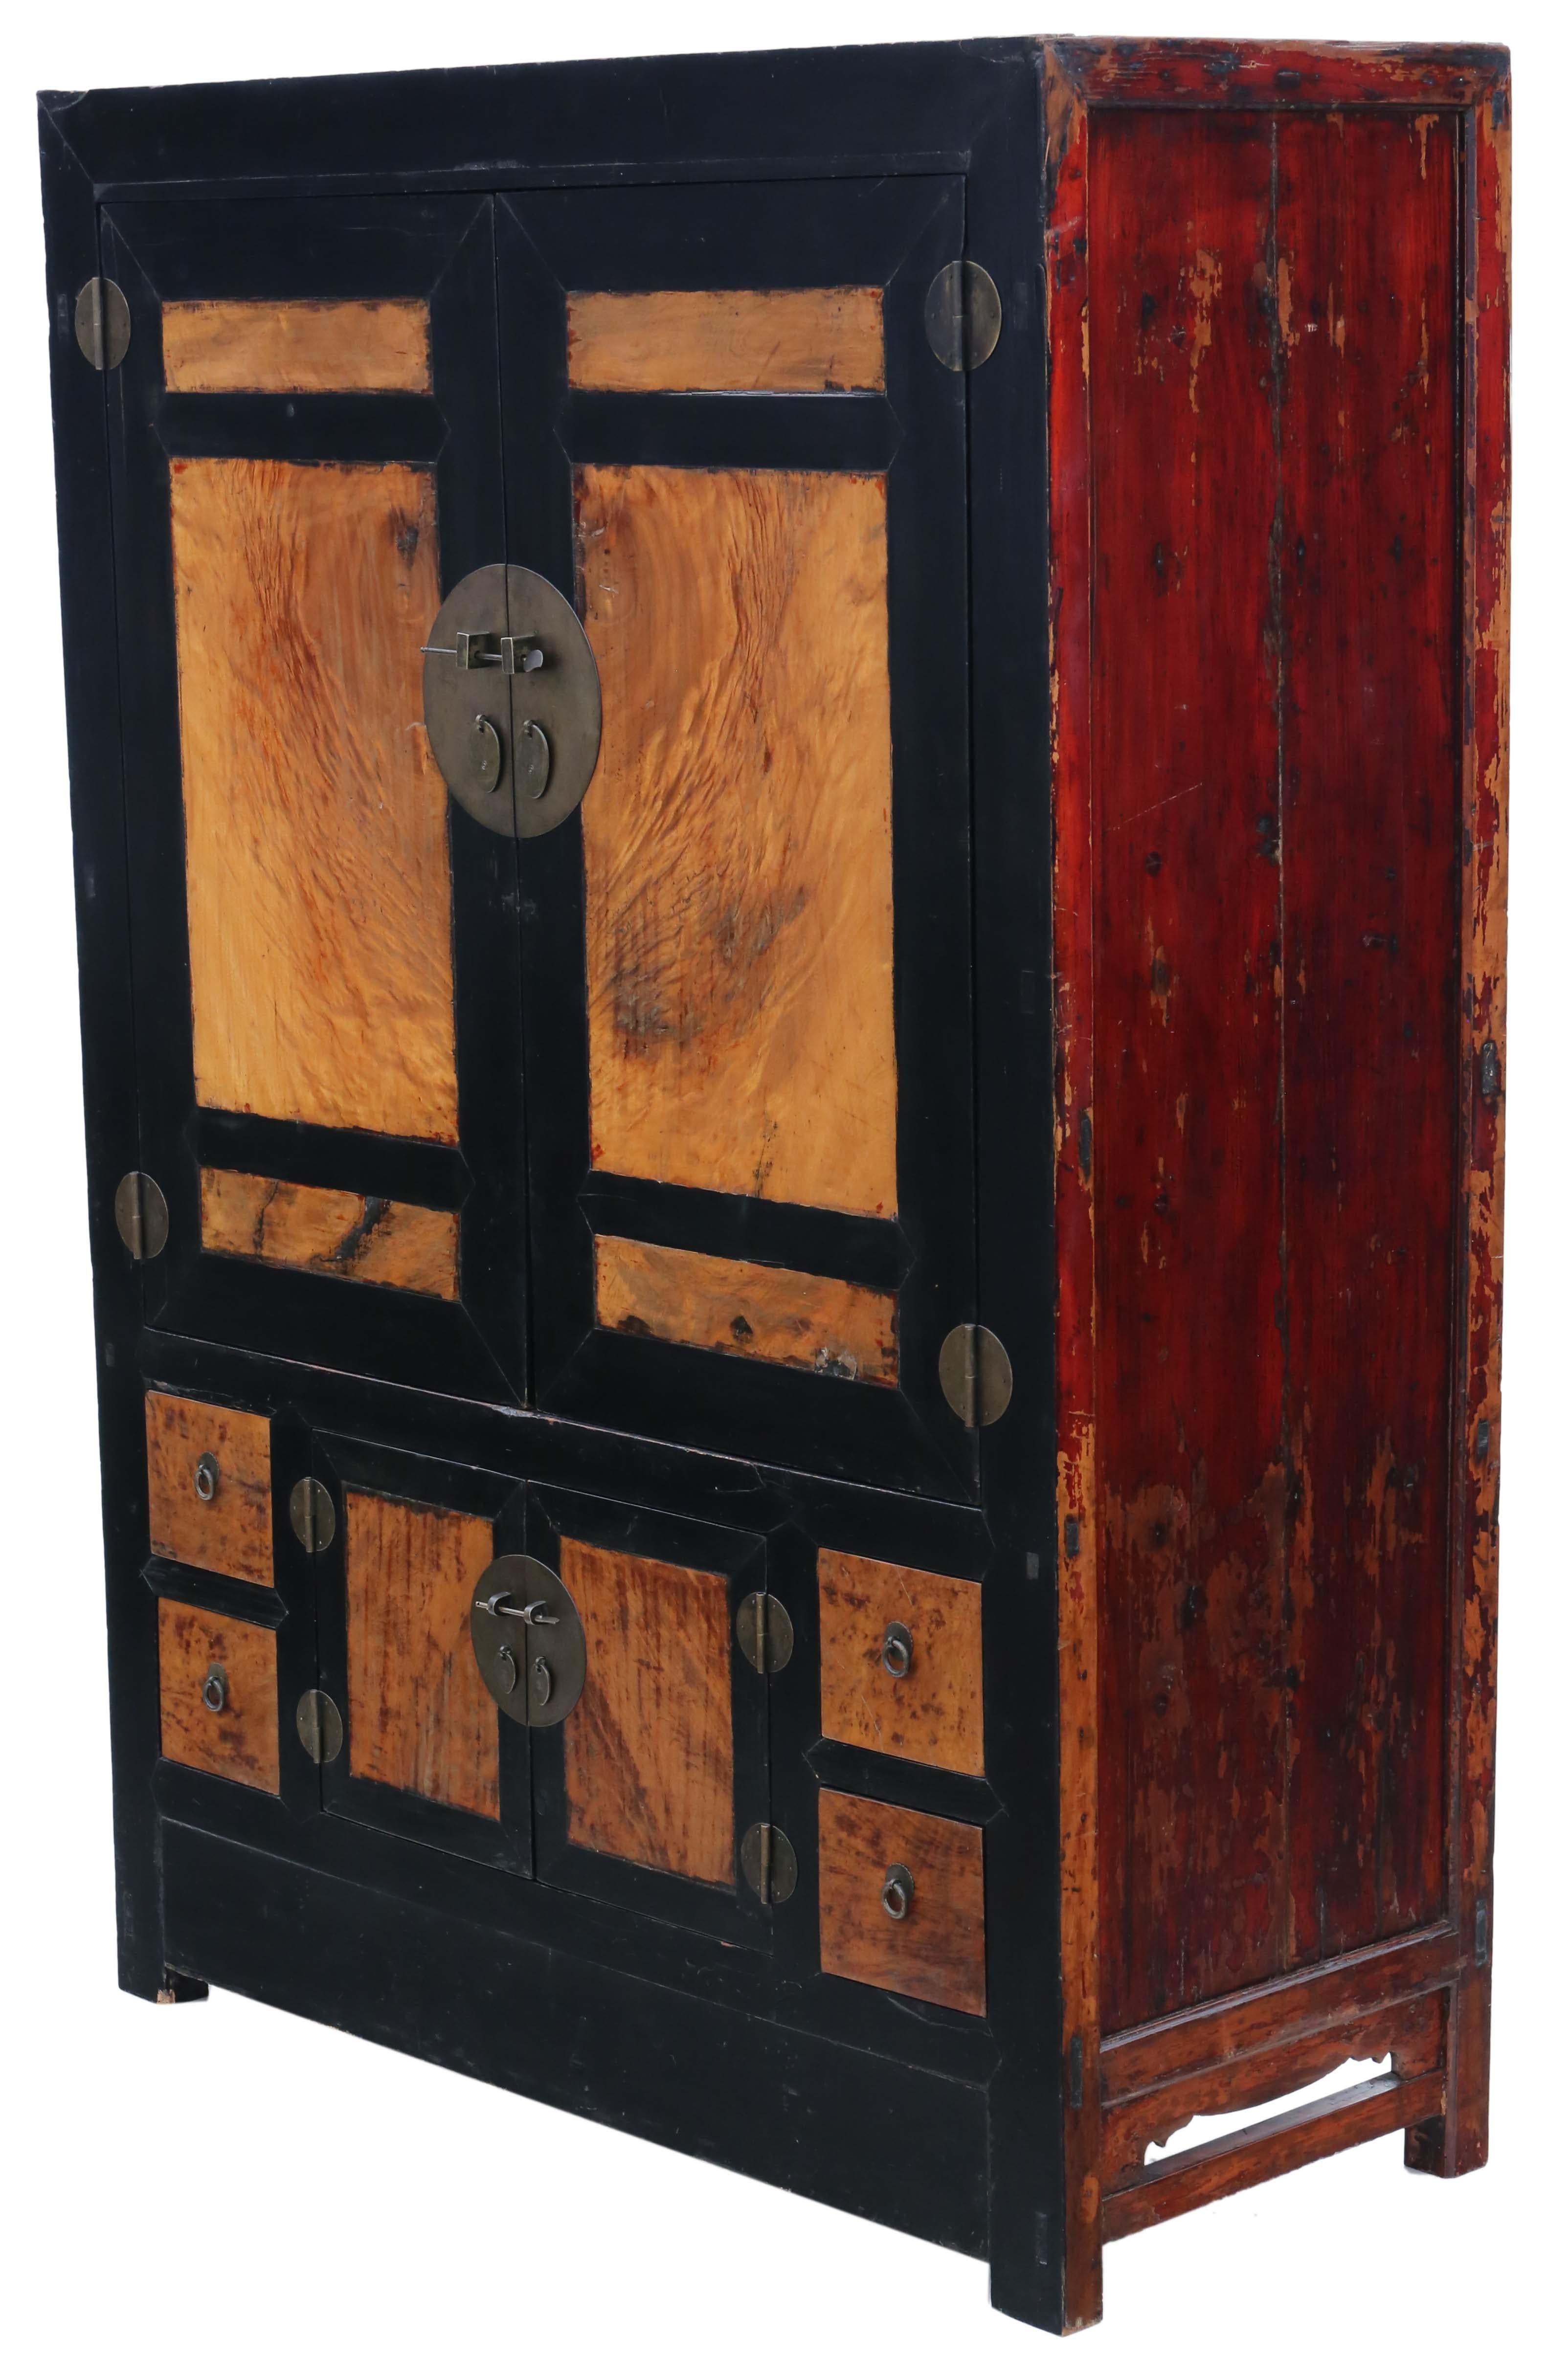 Antique Vintage Chinese hall housekeeper's kitchen larder cupboard dresser, hard to date but probably the second half of the 20th century.

This is a lovely rare style of cupboard, that is full charm and character. Fantastic panel doors.

Solid